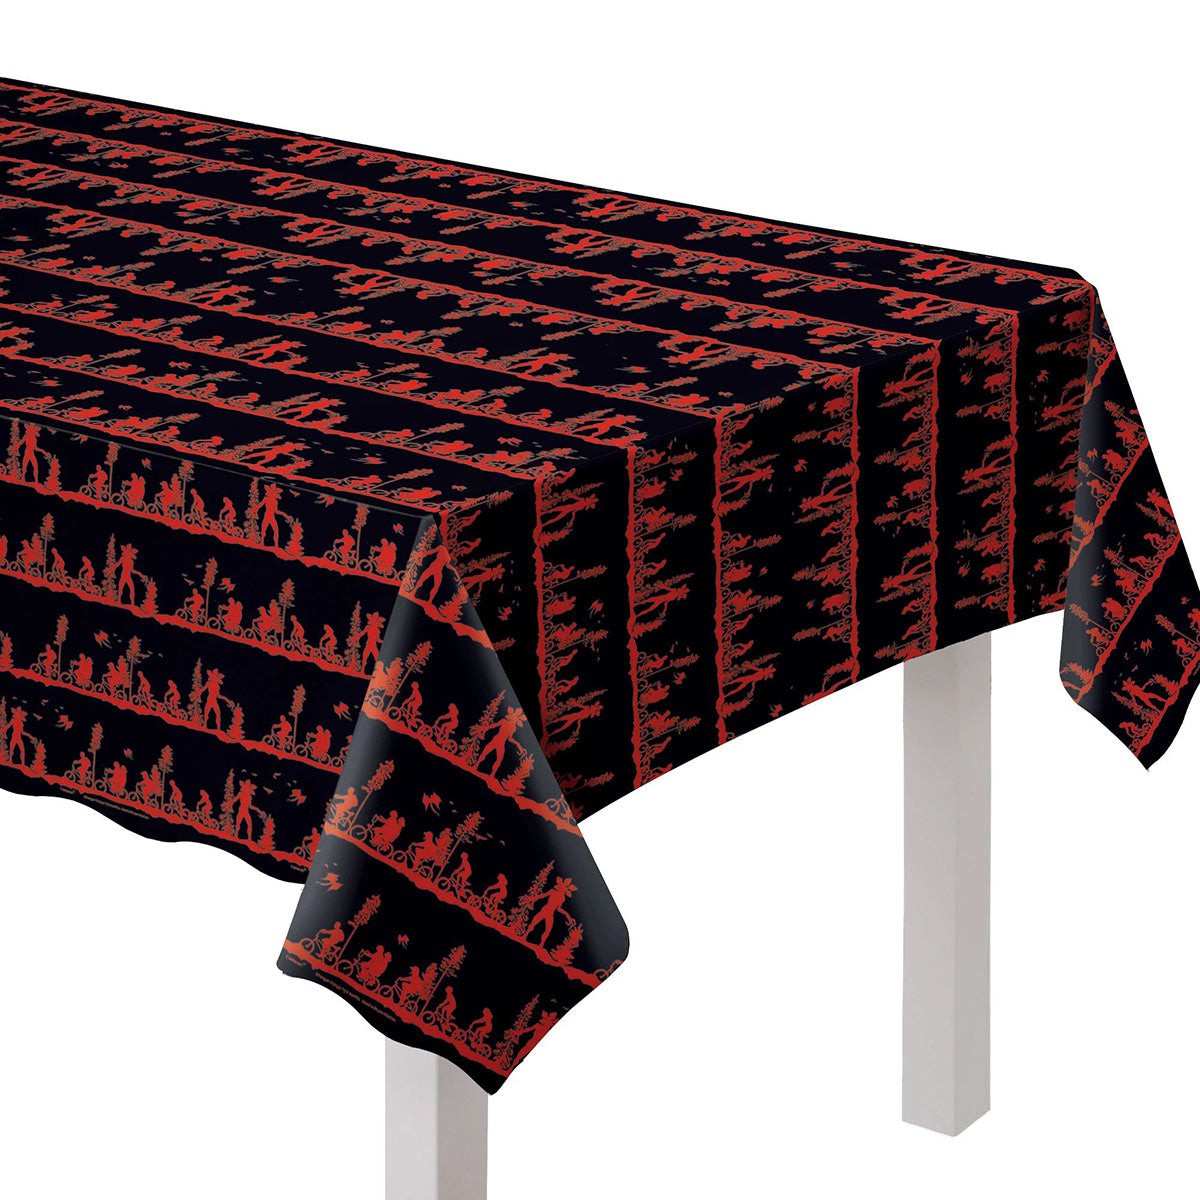 Stranger Things Rectangular Plastic Table Cover, 54 x 108 Inches